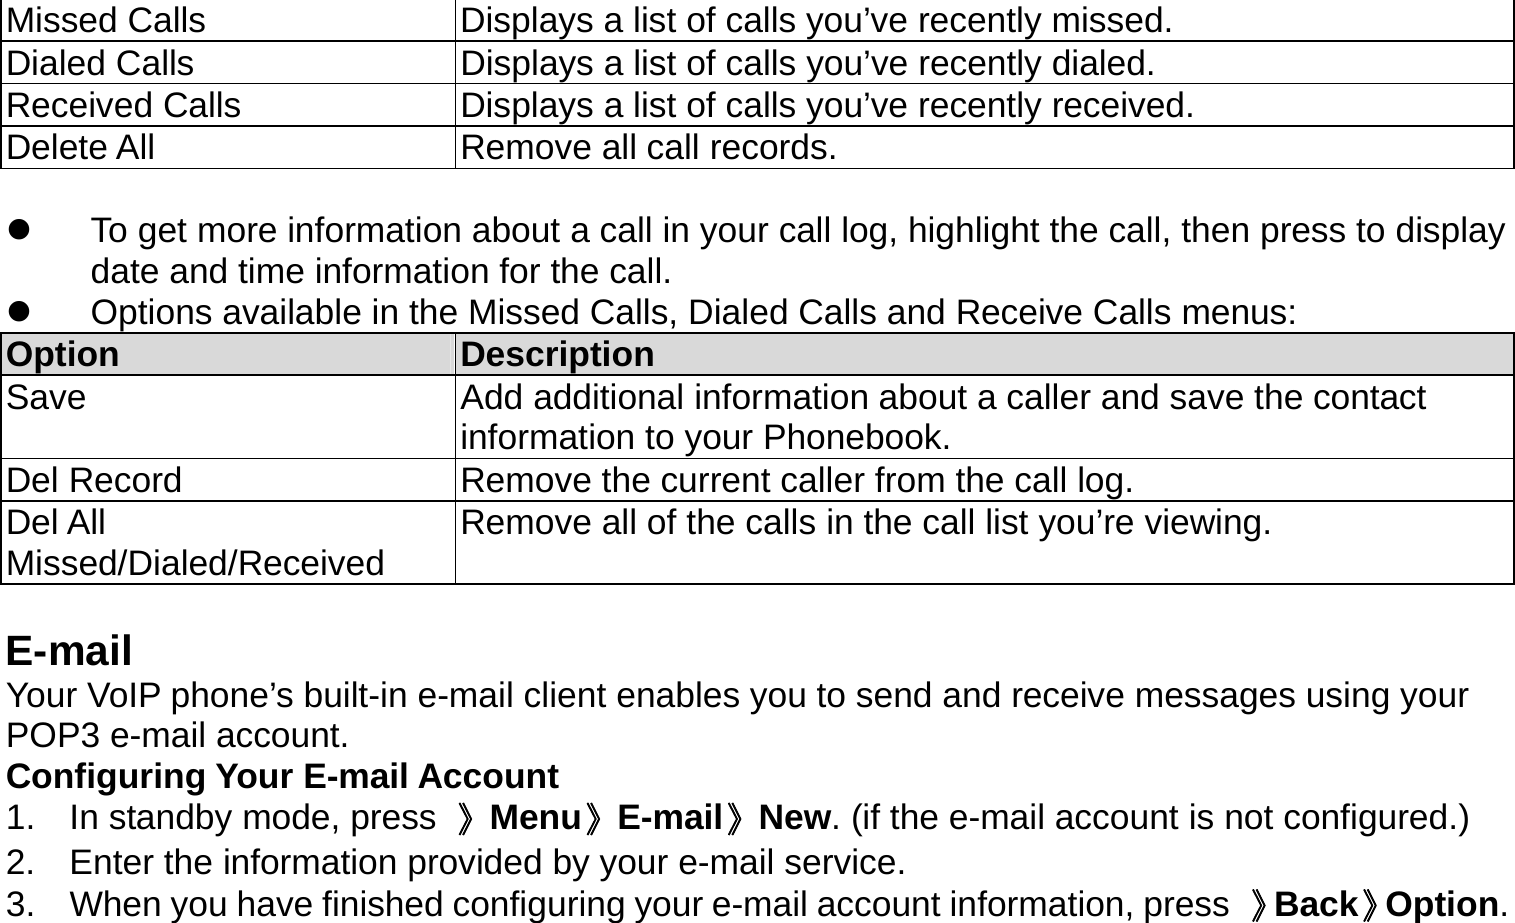 Missed Calls  Displays a list of calls you’ve recently missed. Dialed Calls  Displays a list of calls you’ve recently dialed. Received Calls  Displays a list of calls you’ve recently received. Delete All  Remove all call records.    To get more information about a call in your call log, highlight the call, then press to display date and time information for the call.   Options available in the Missed Calls, Dialed Calls and Receive Calls menus: Option  Description Save   Add additional information about a caller and save the contact information to your Phonebook. Del Record  Remove the current caller from the call log. Del All Missed/Dialed/Received  Remove all of the calls in the call list you’re viewing.  E-mail Your VoIP phone’s built-in e-mail client enables you to send and receive messages using your POP3 e-mail account. Configuring Your E-mail Account 1.  In standby mode, press  》Menu》E-mail》New. (if the e-mail account is not configured.) 2.  Enter the information provided by your e-mail service. 3.  When you have finished configuring your e-mail account information, press  》Back》Option. 